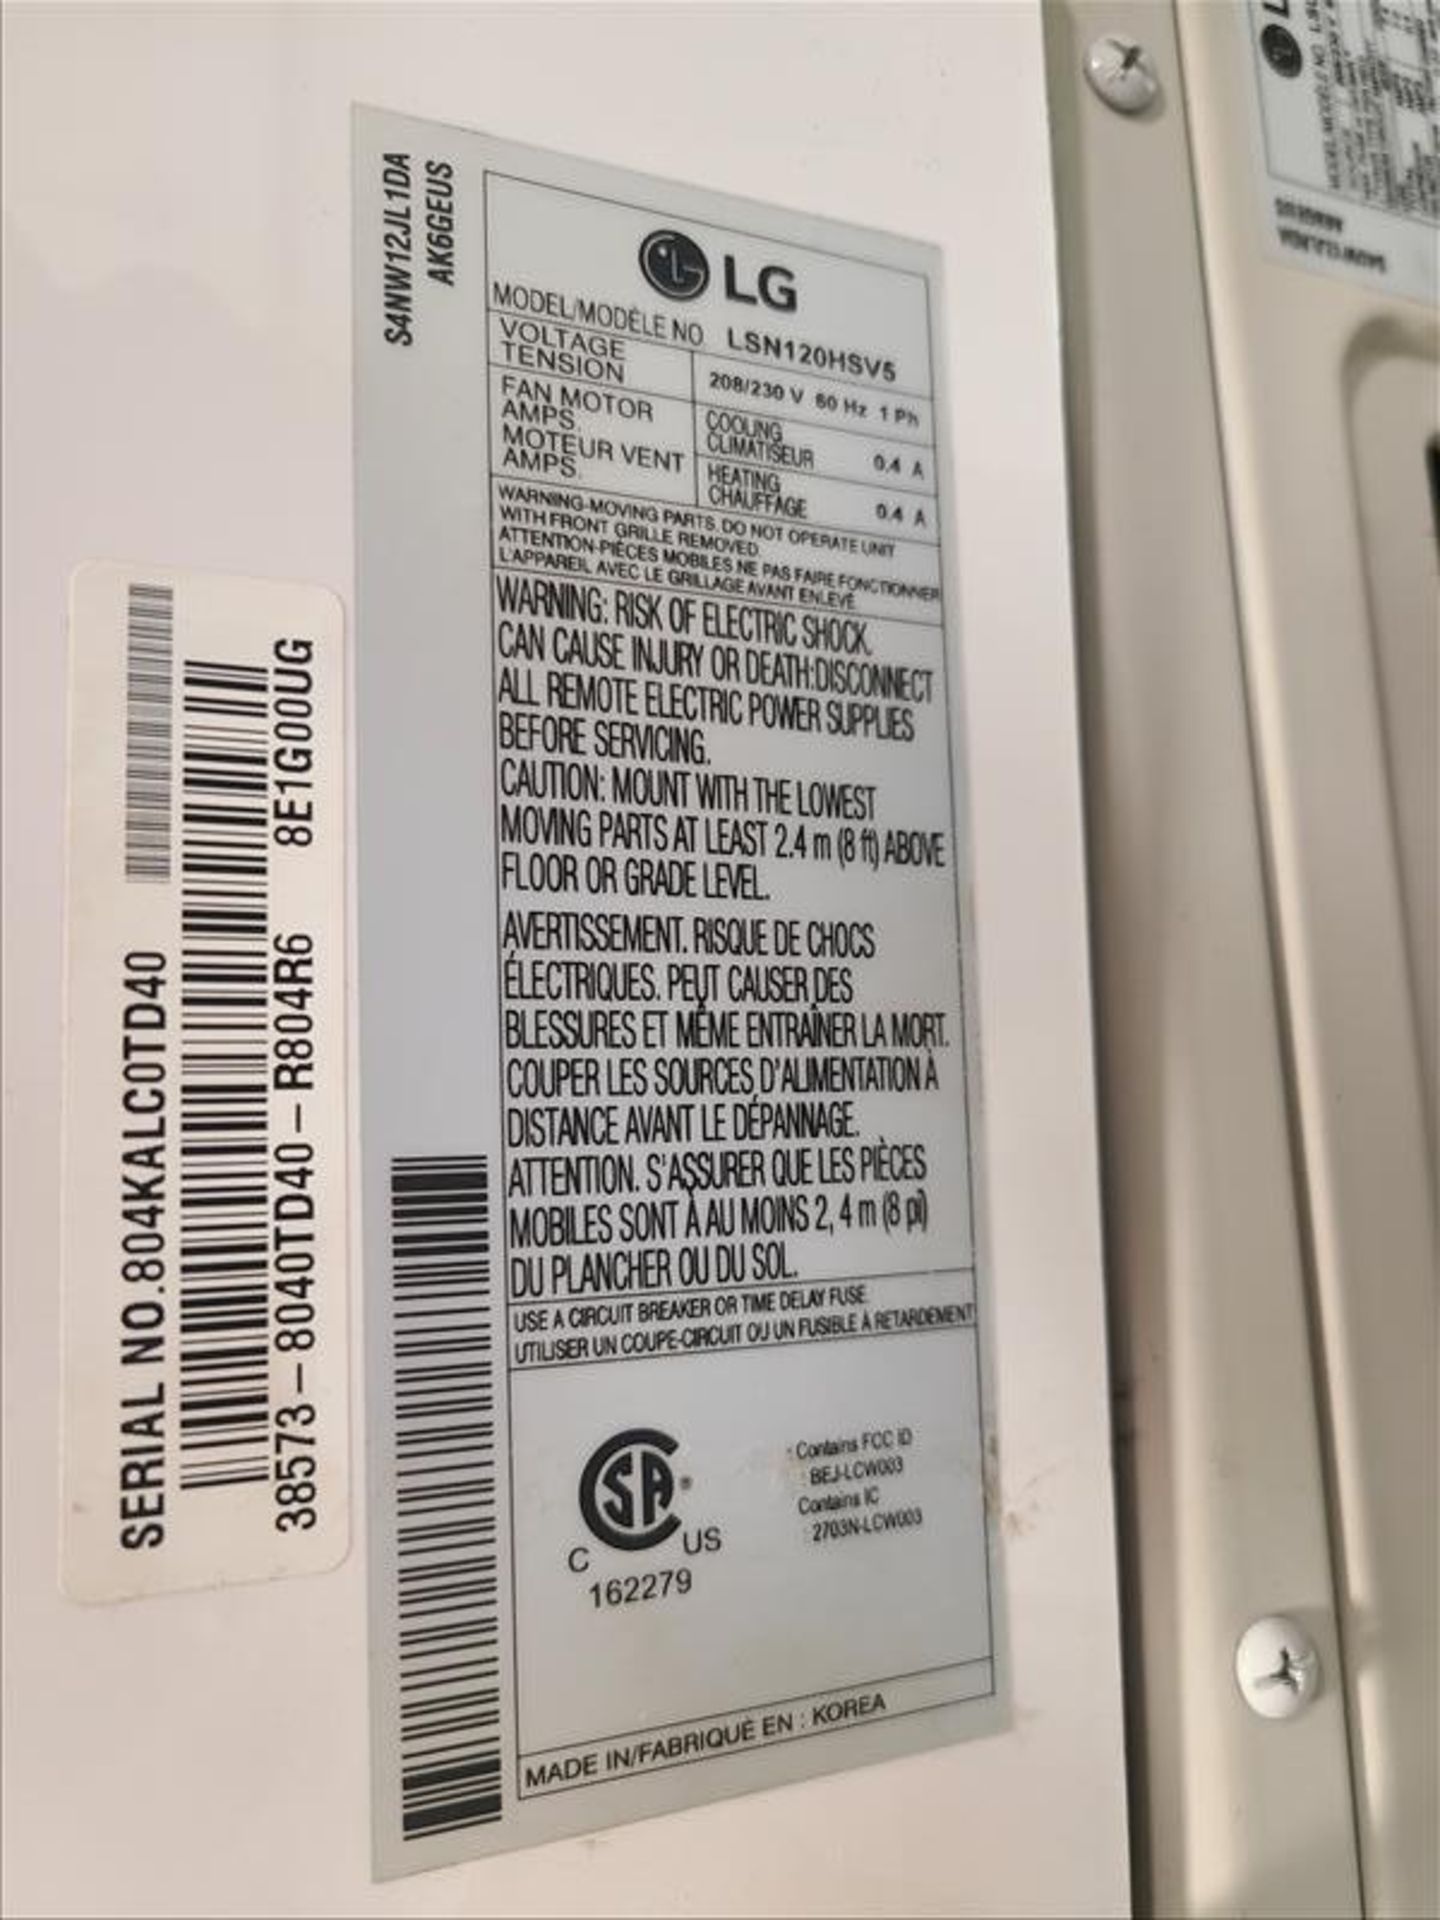 LG Cooling/Heating Wall Mounted Air Conditioning System, model LSN120HSV5, S/N 804KALC0TD40, w/ LG - Image 2 of 3